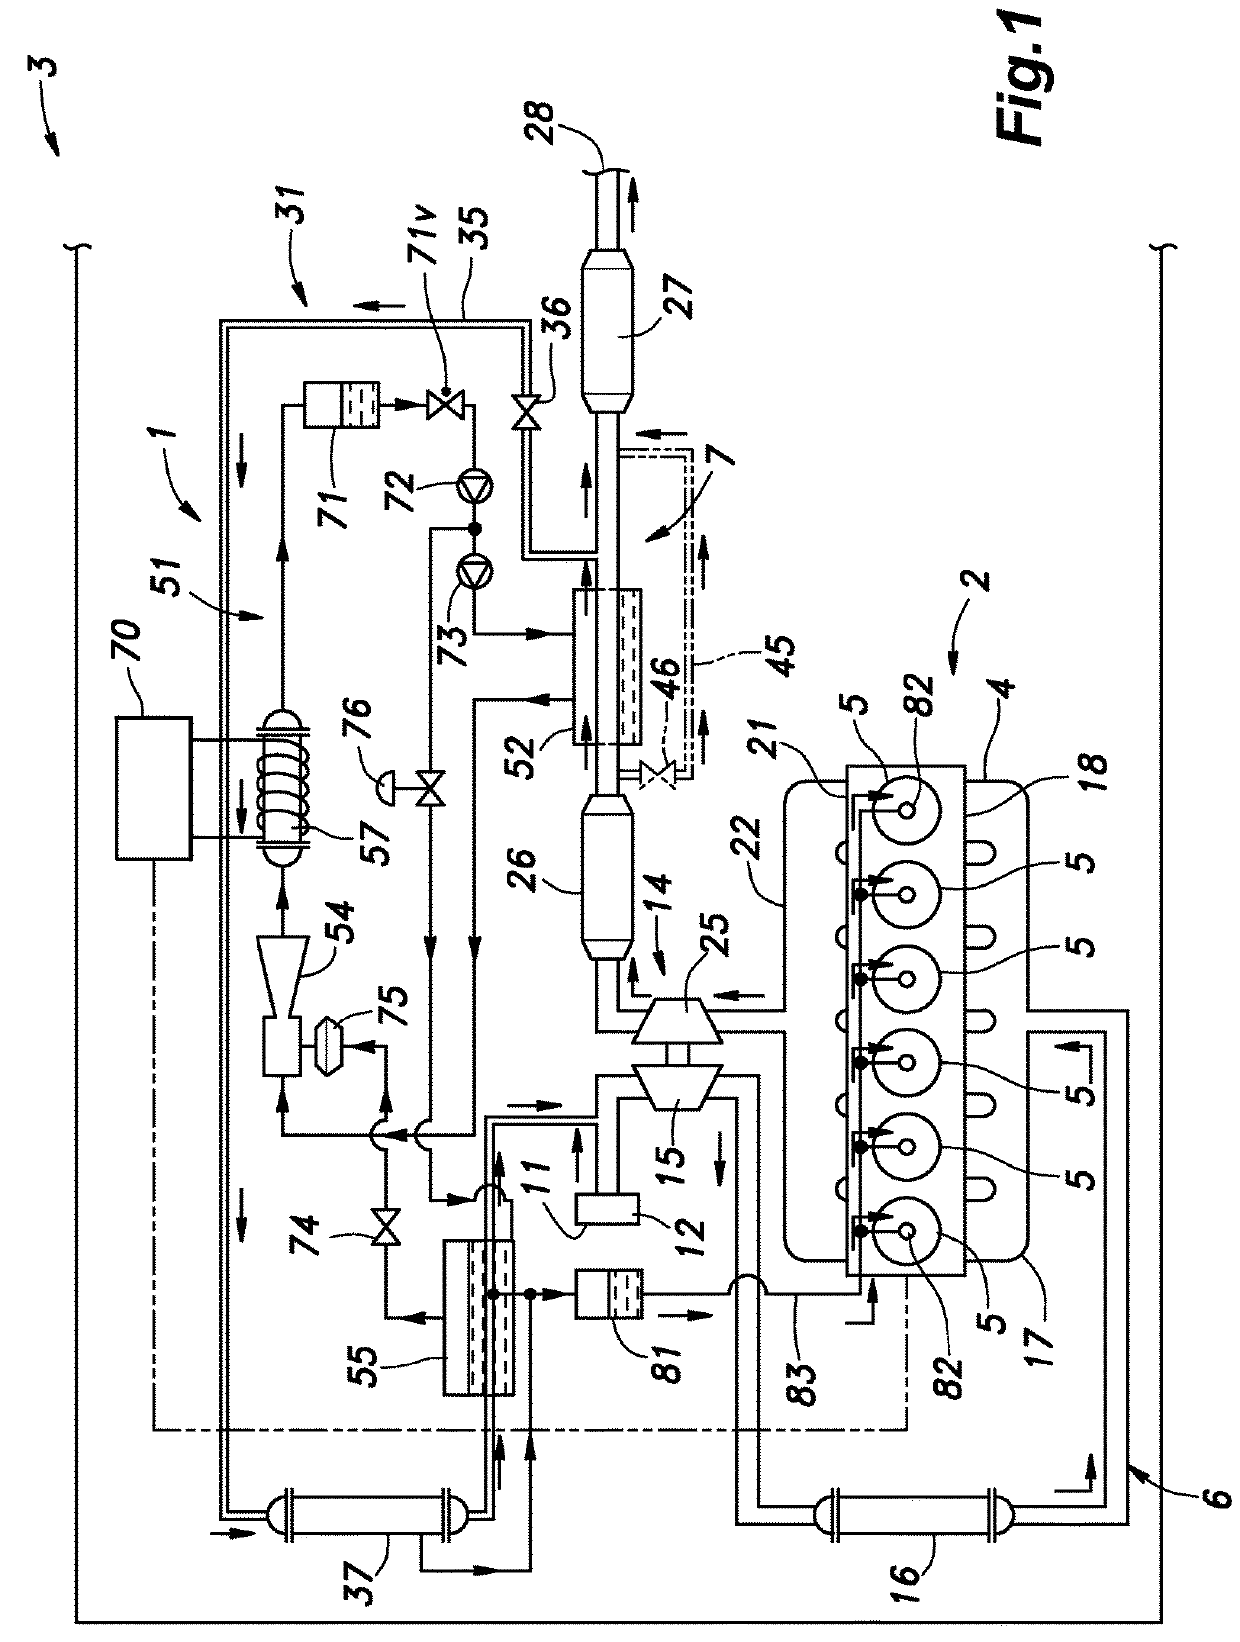 Intake and exhaust system of internal combustion engine